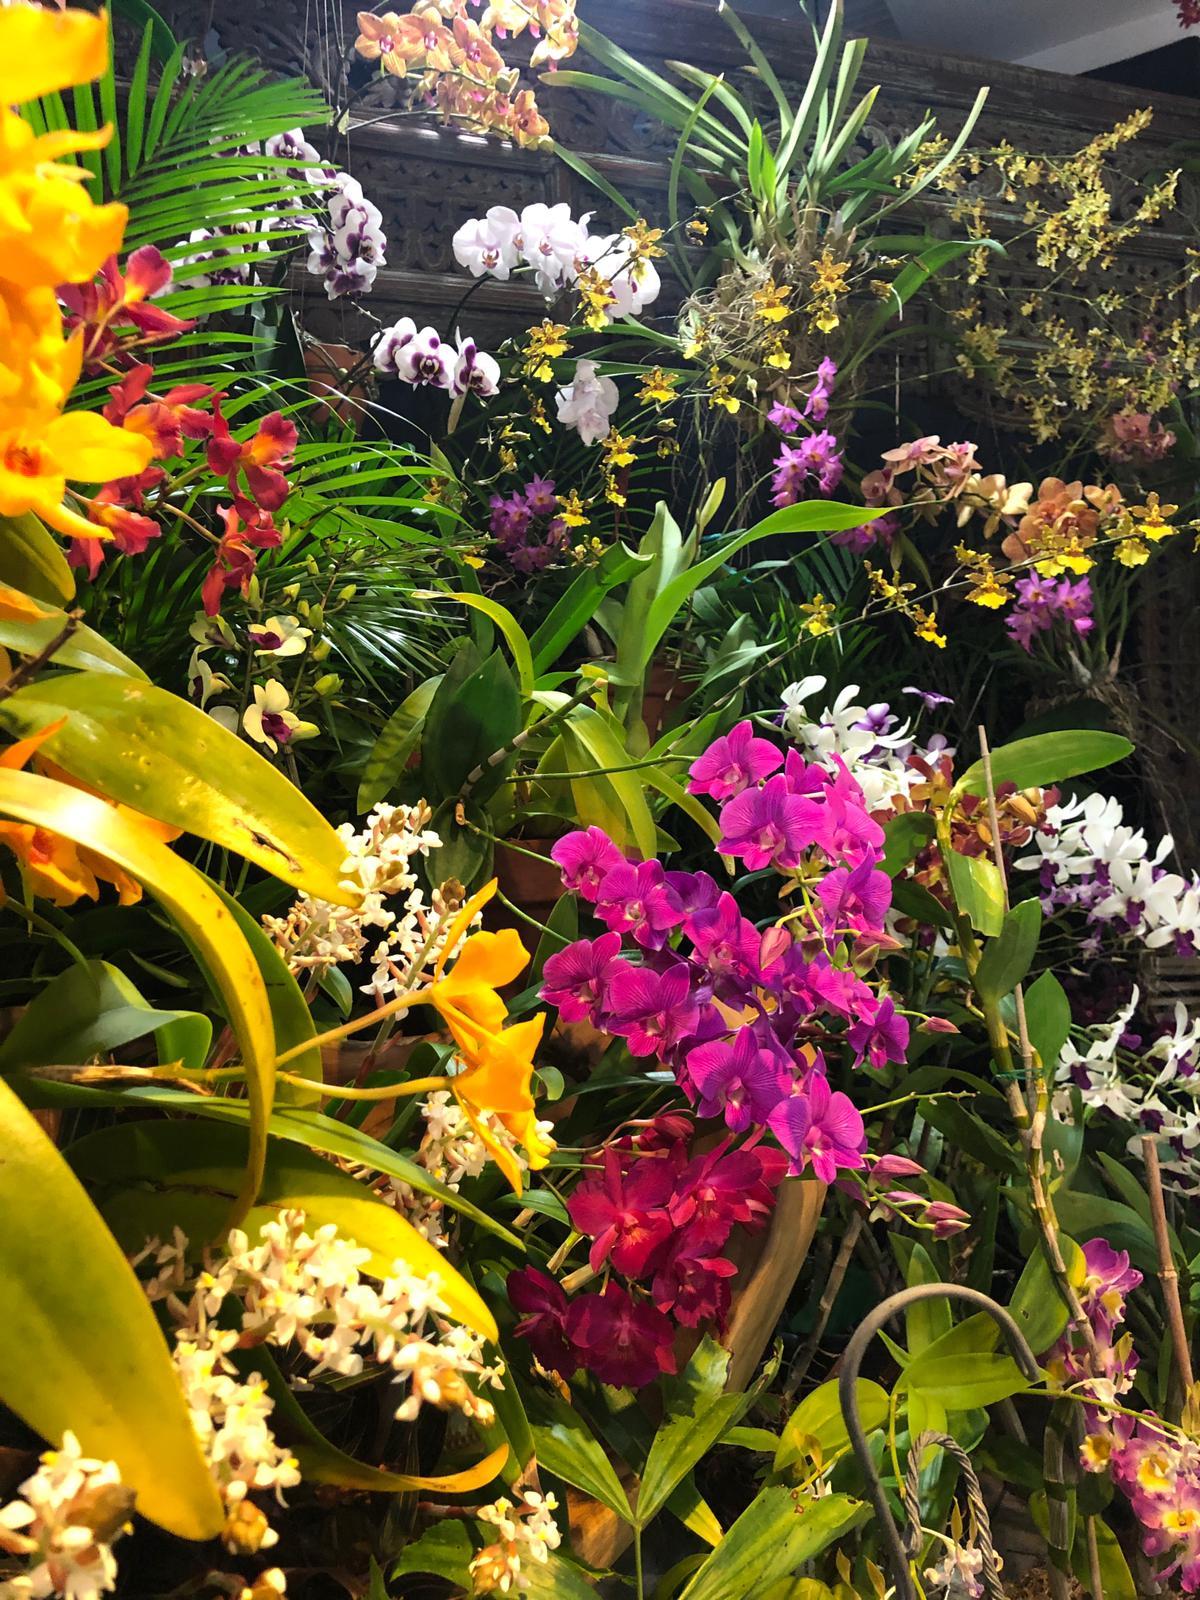 Cayman “Botanic PArk Orchid Show and Sale is Back” IEyeNews